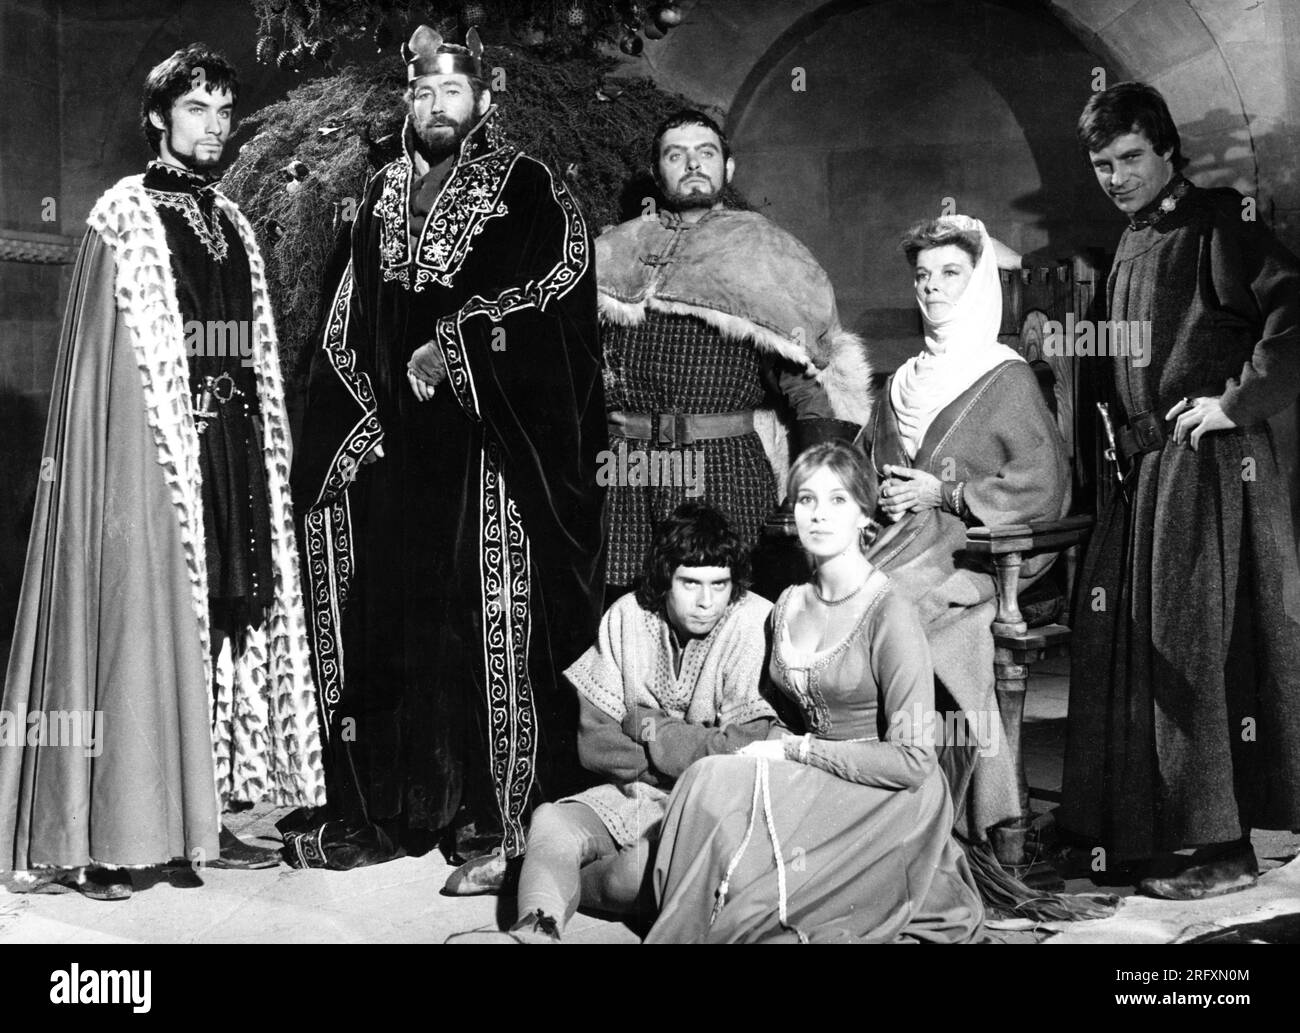 TIMOTHY DALTON PETER O'TOOLE ANTHONY HOPKINS KATHARINE HEPBURN JOHN CASTLE and in front NIGEL TERRY and JANE MERROW group portrait in THE LION IN WINTER director ANTHONY HARVEY screenplay James Goldman costume design Margaret Furse and Lee Poll music John Barry executive producer Joseph E. Levine UK-USA co-production Haworth Productions / Avco Embassy Stock Photo